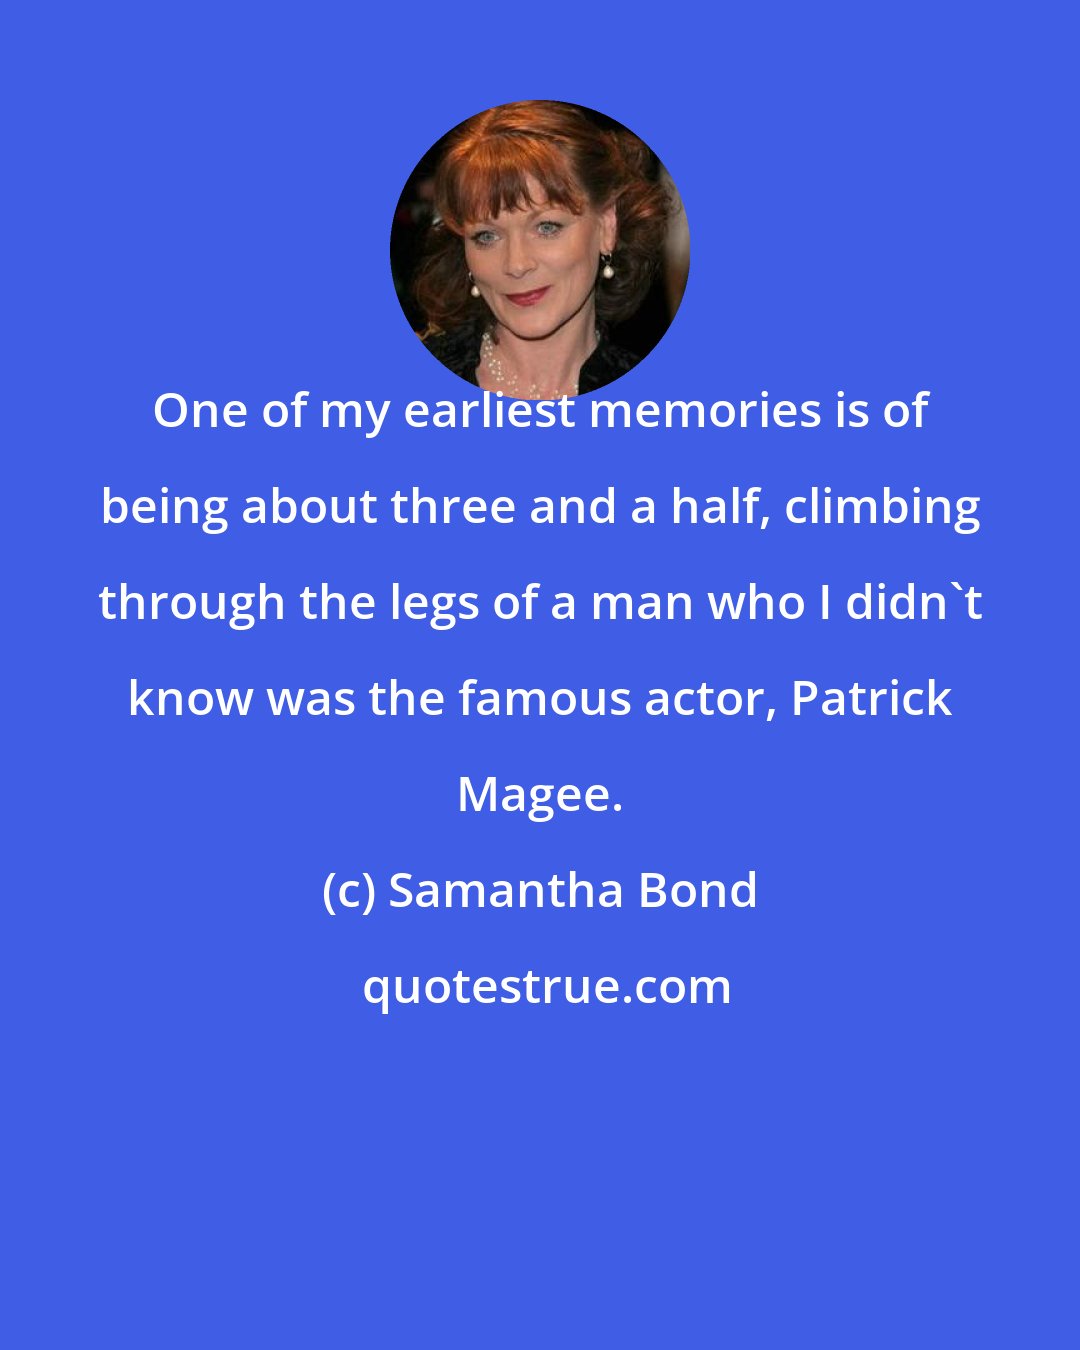 Samantha Bond: One of my earliest memories is of being about three and a half, climbing through the legs of a man who I didn't know was the famous actor, Patrick Magee.